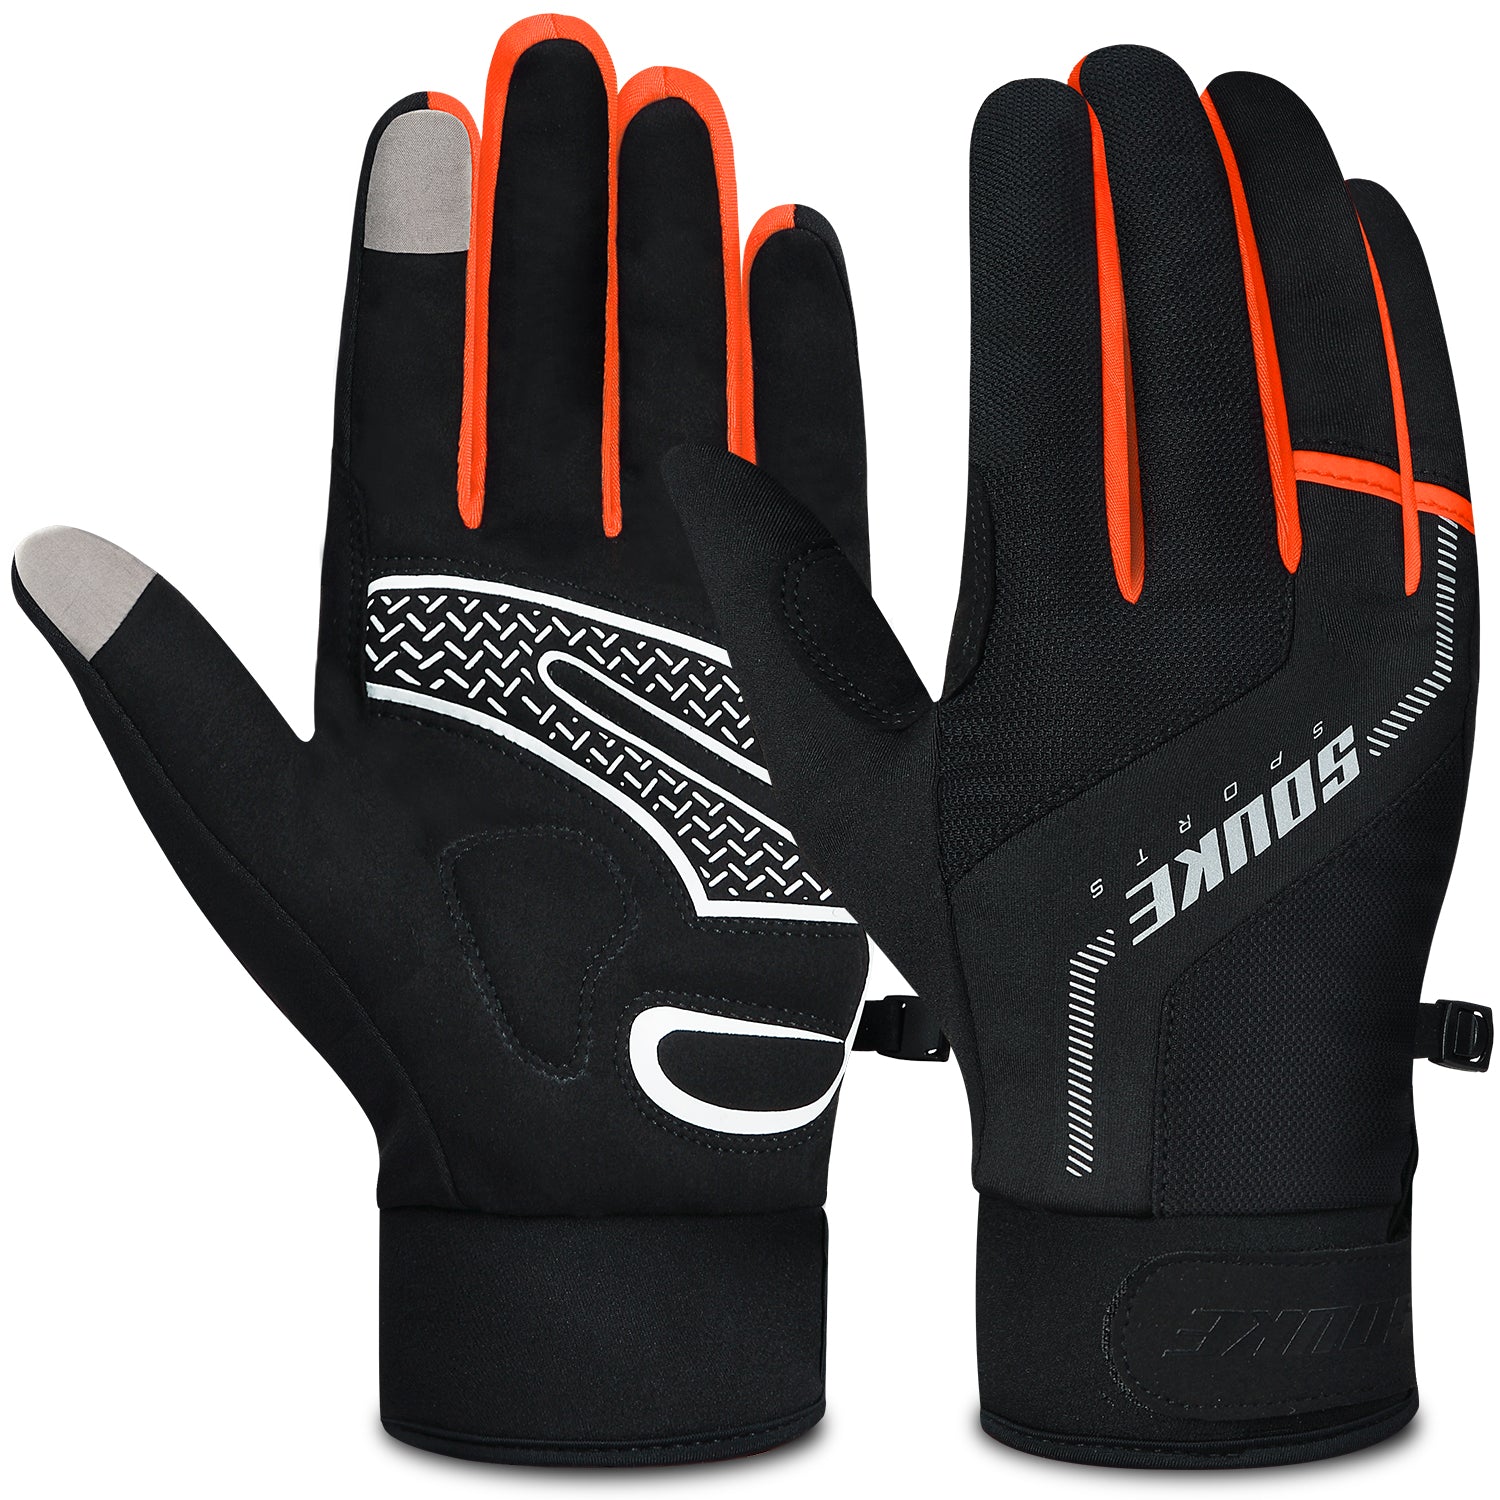 souke sports, souke ST1903, cycling accessories, riding accessories, cycling gloves, FULL finger cycling gloves, bicycle gloves for men and women, road bike cycling gloves, orange, green, black and red white cycling gloves, cycling gloves padded, padded cycling gloves for men and women (6633640198257)